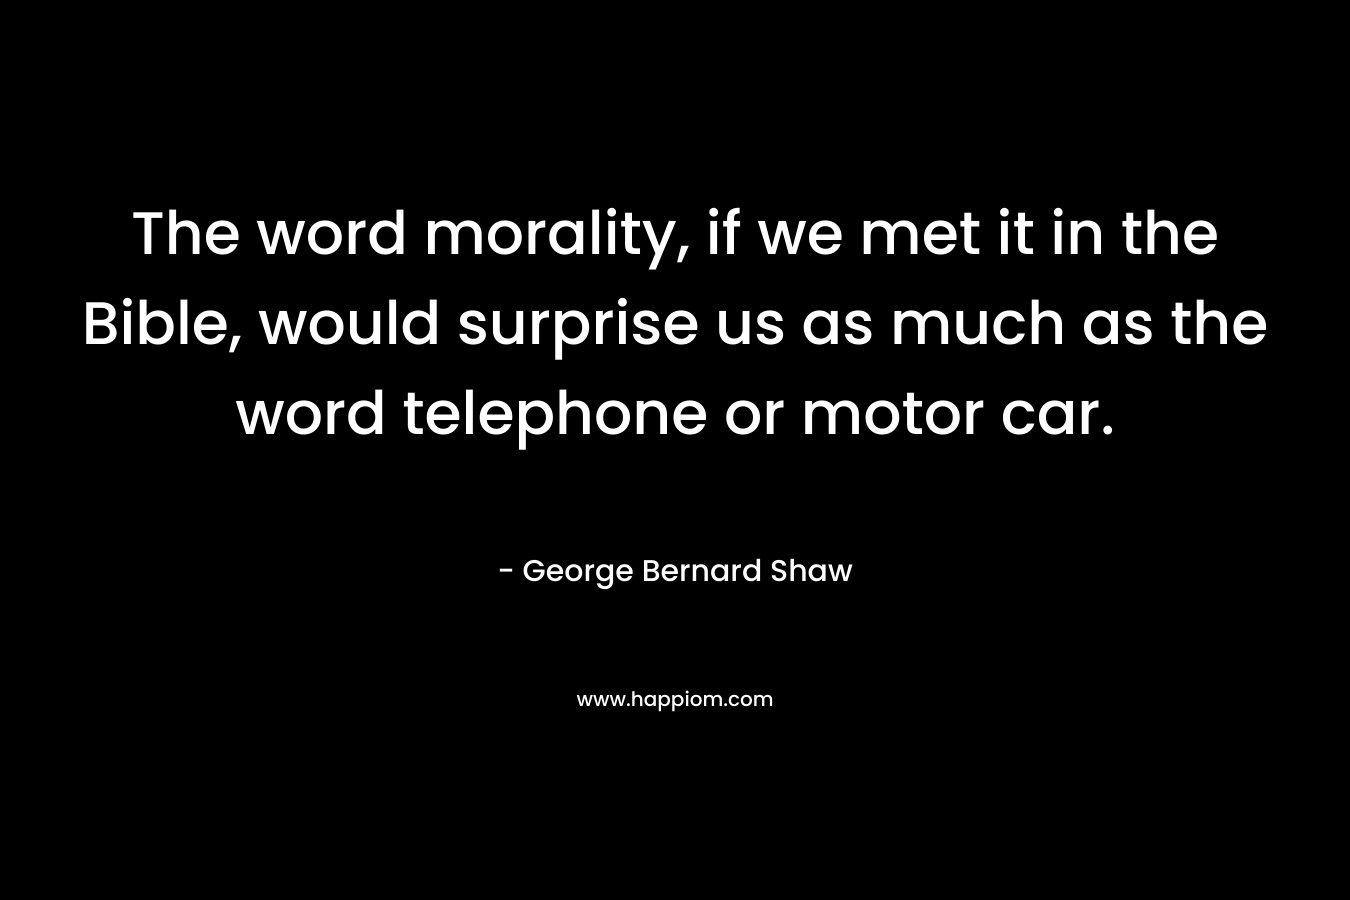 The word morality, if we met it in the Bible, would surprise us as much as the word telephone or motor car. – George Bernard Shaw